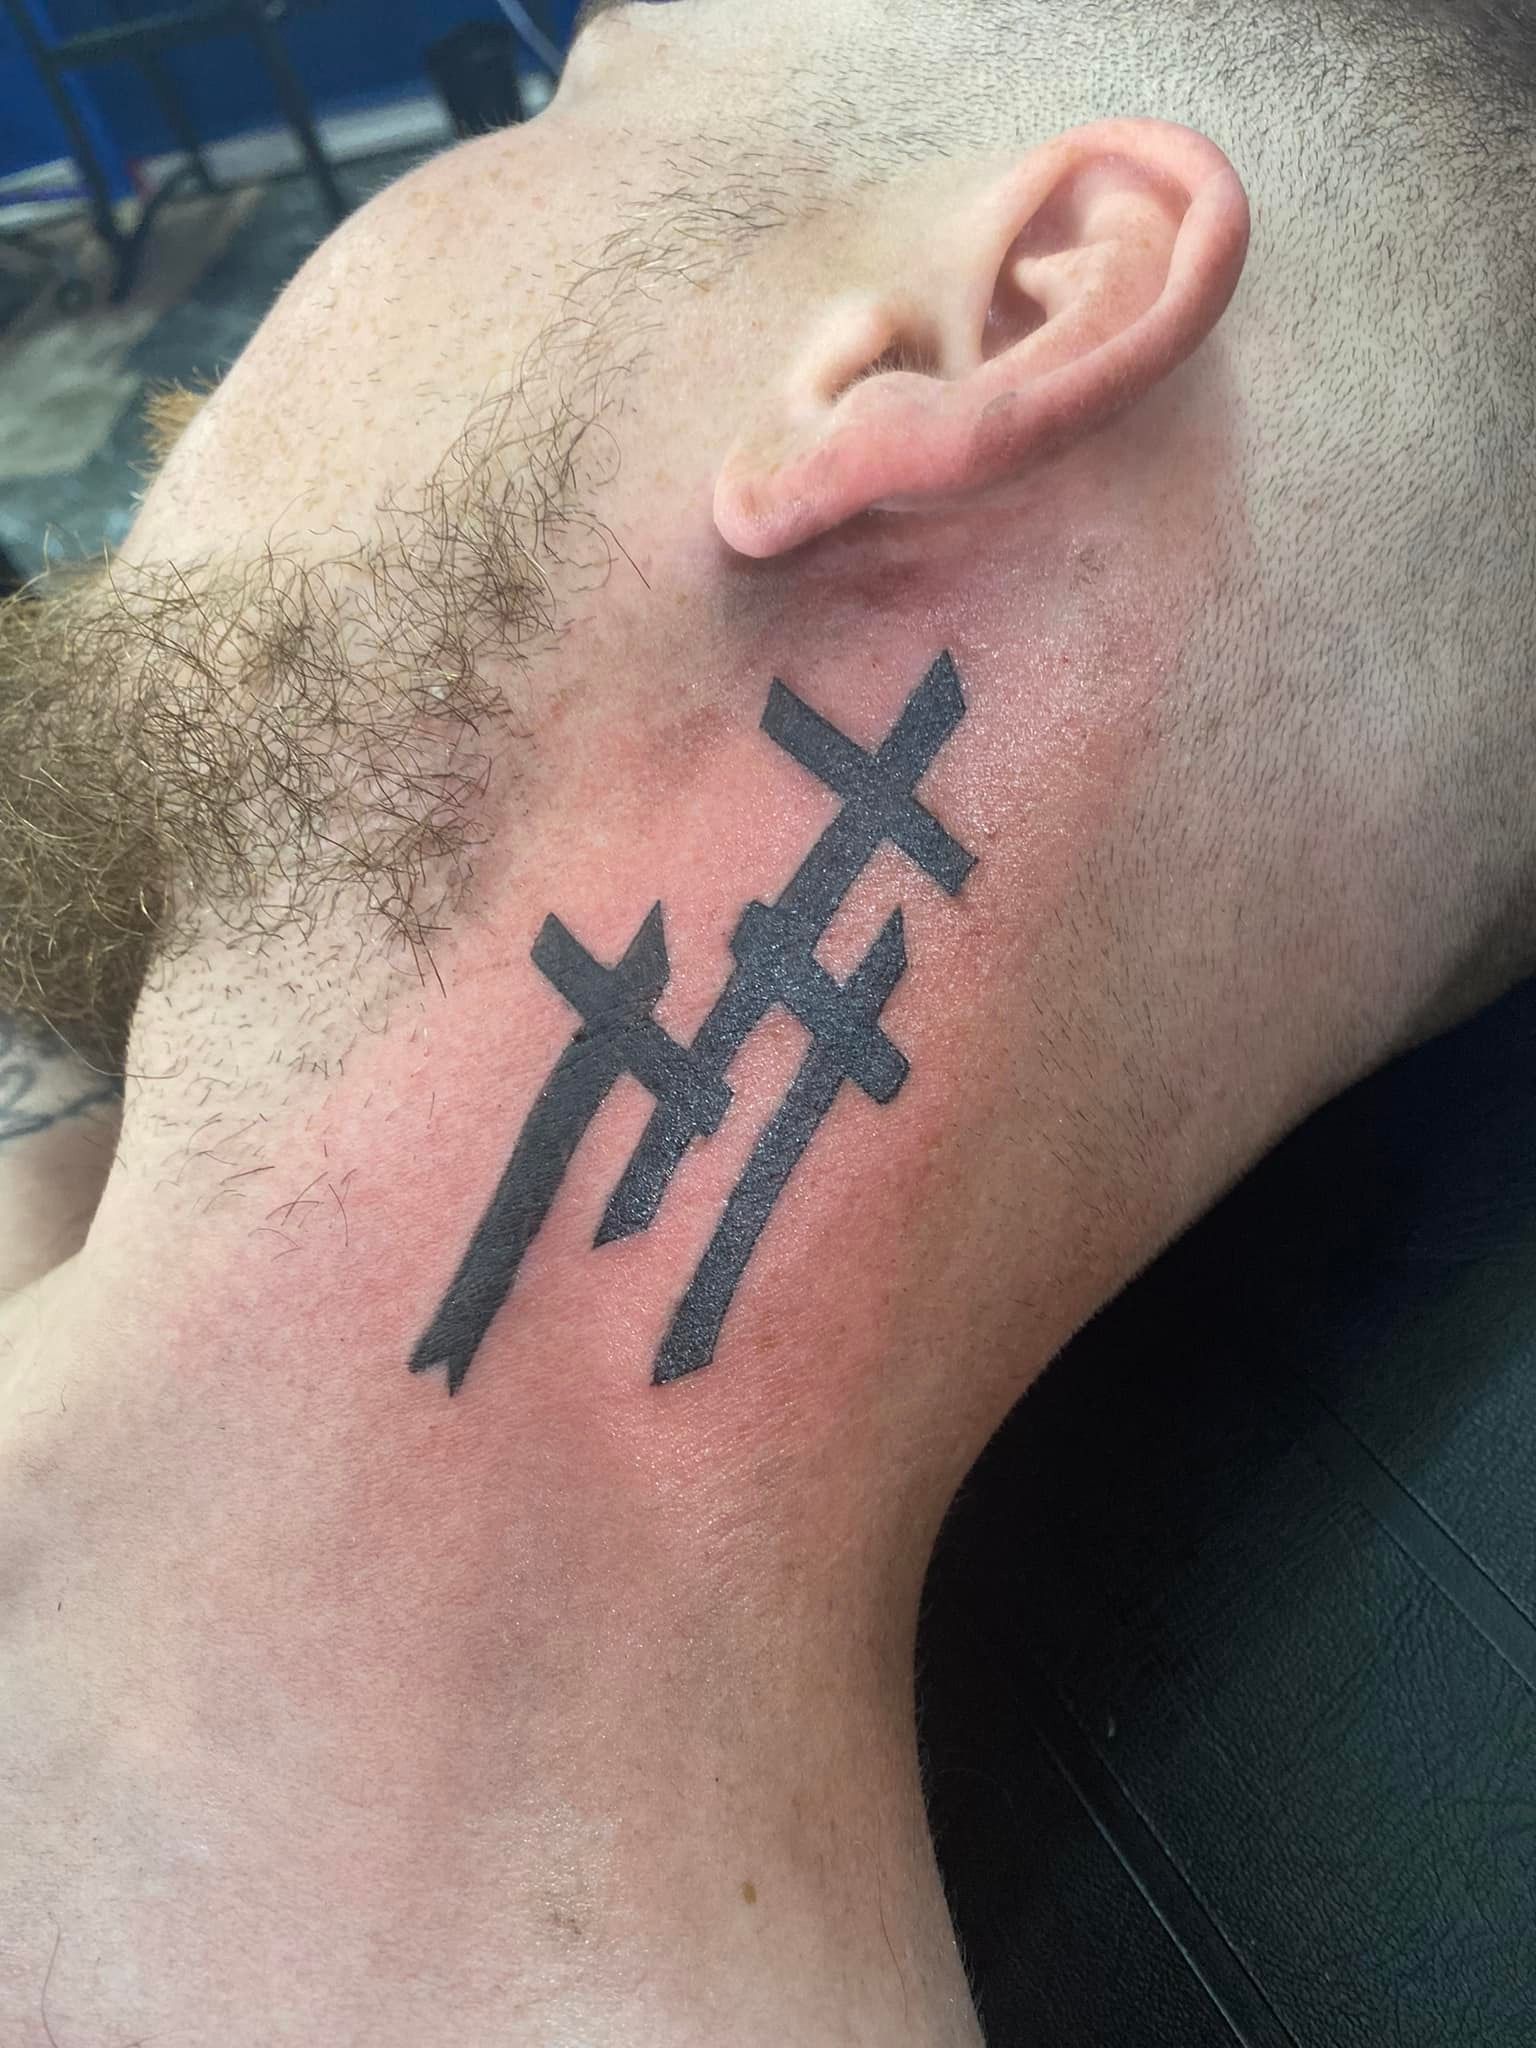 What Is The Meaning Of The Three Crosses Tattoo Is it For You